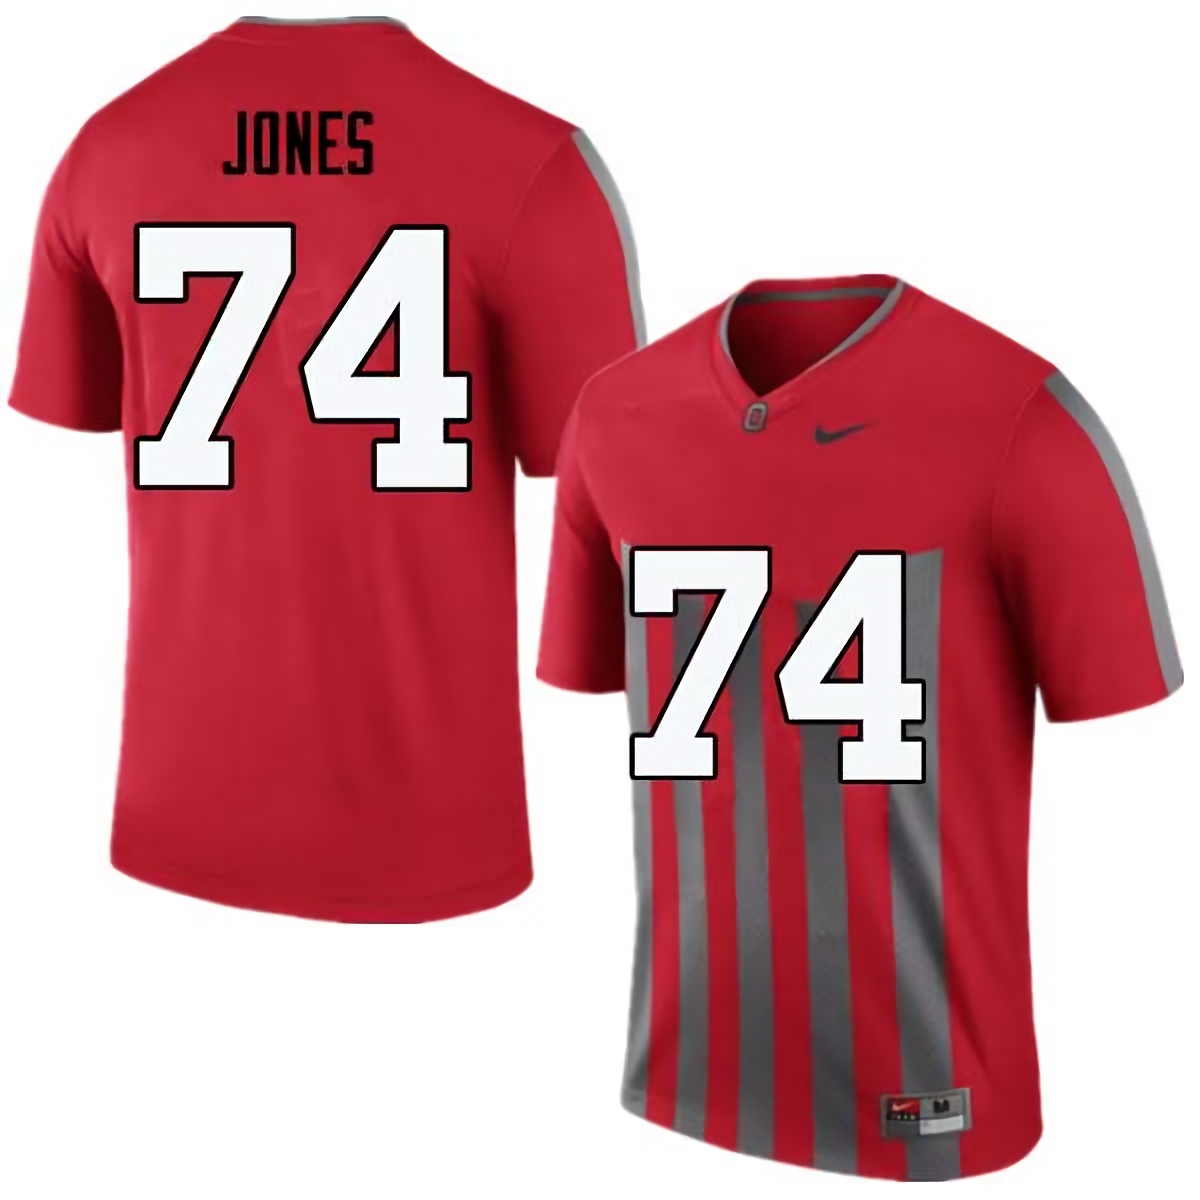 Jamarco Jones Ohio State Buckeyes Men's NCAA #74 Nike Throwback Red College Stitched Football Jersey JHP8456RG